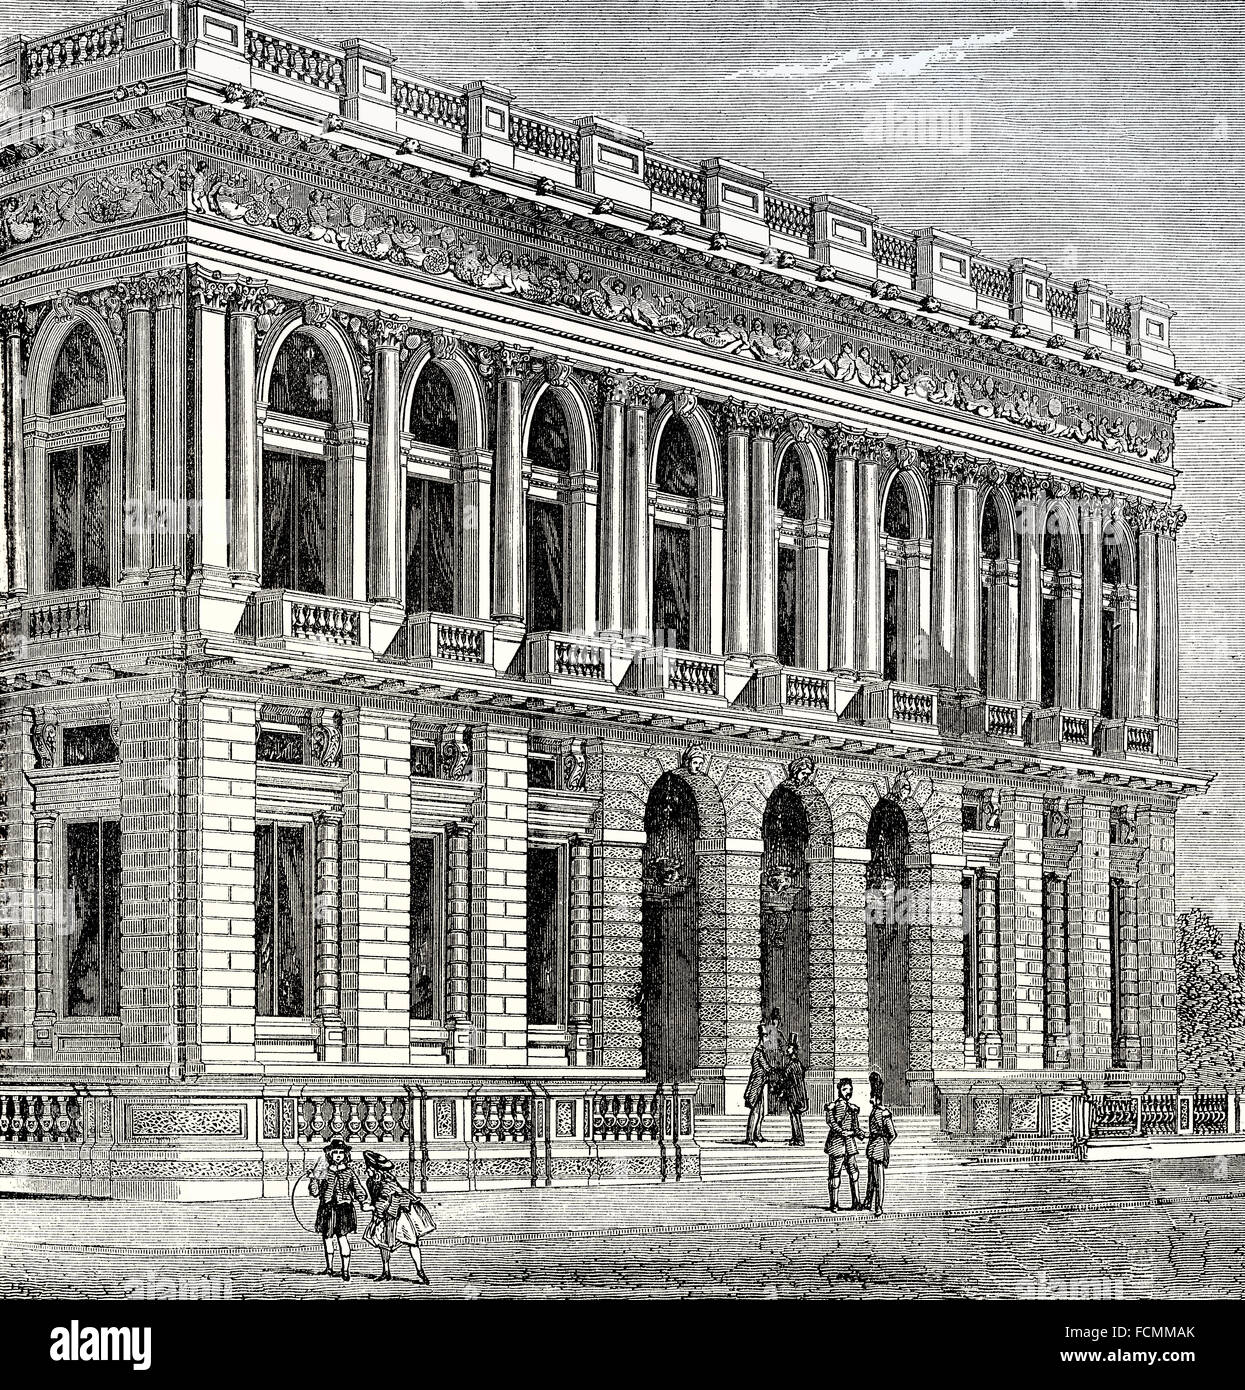 The Army & Navy Club House, 1875, Pall Mall, a street in the City of Westminster, London, England Stock Photo